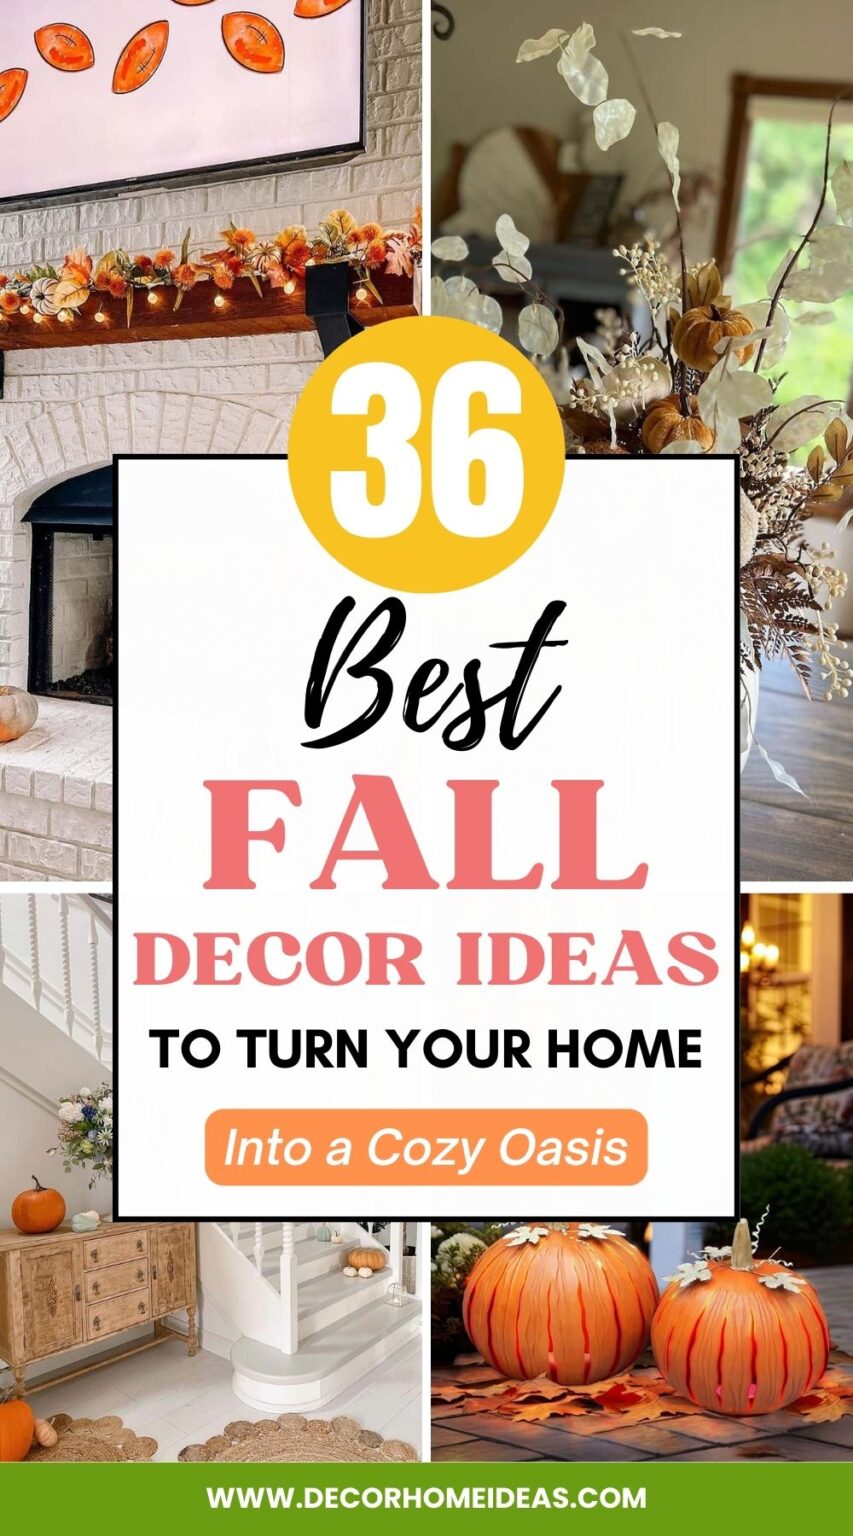 36 Beautiful Fall Decor Ideas To Turn Your Home Into a Cozy Oasis